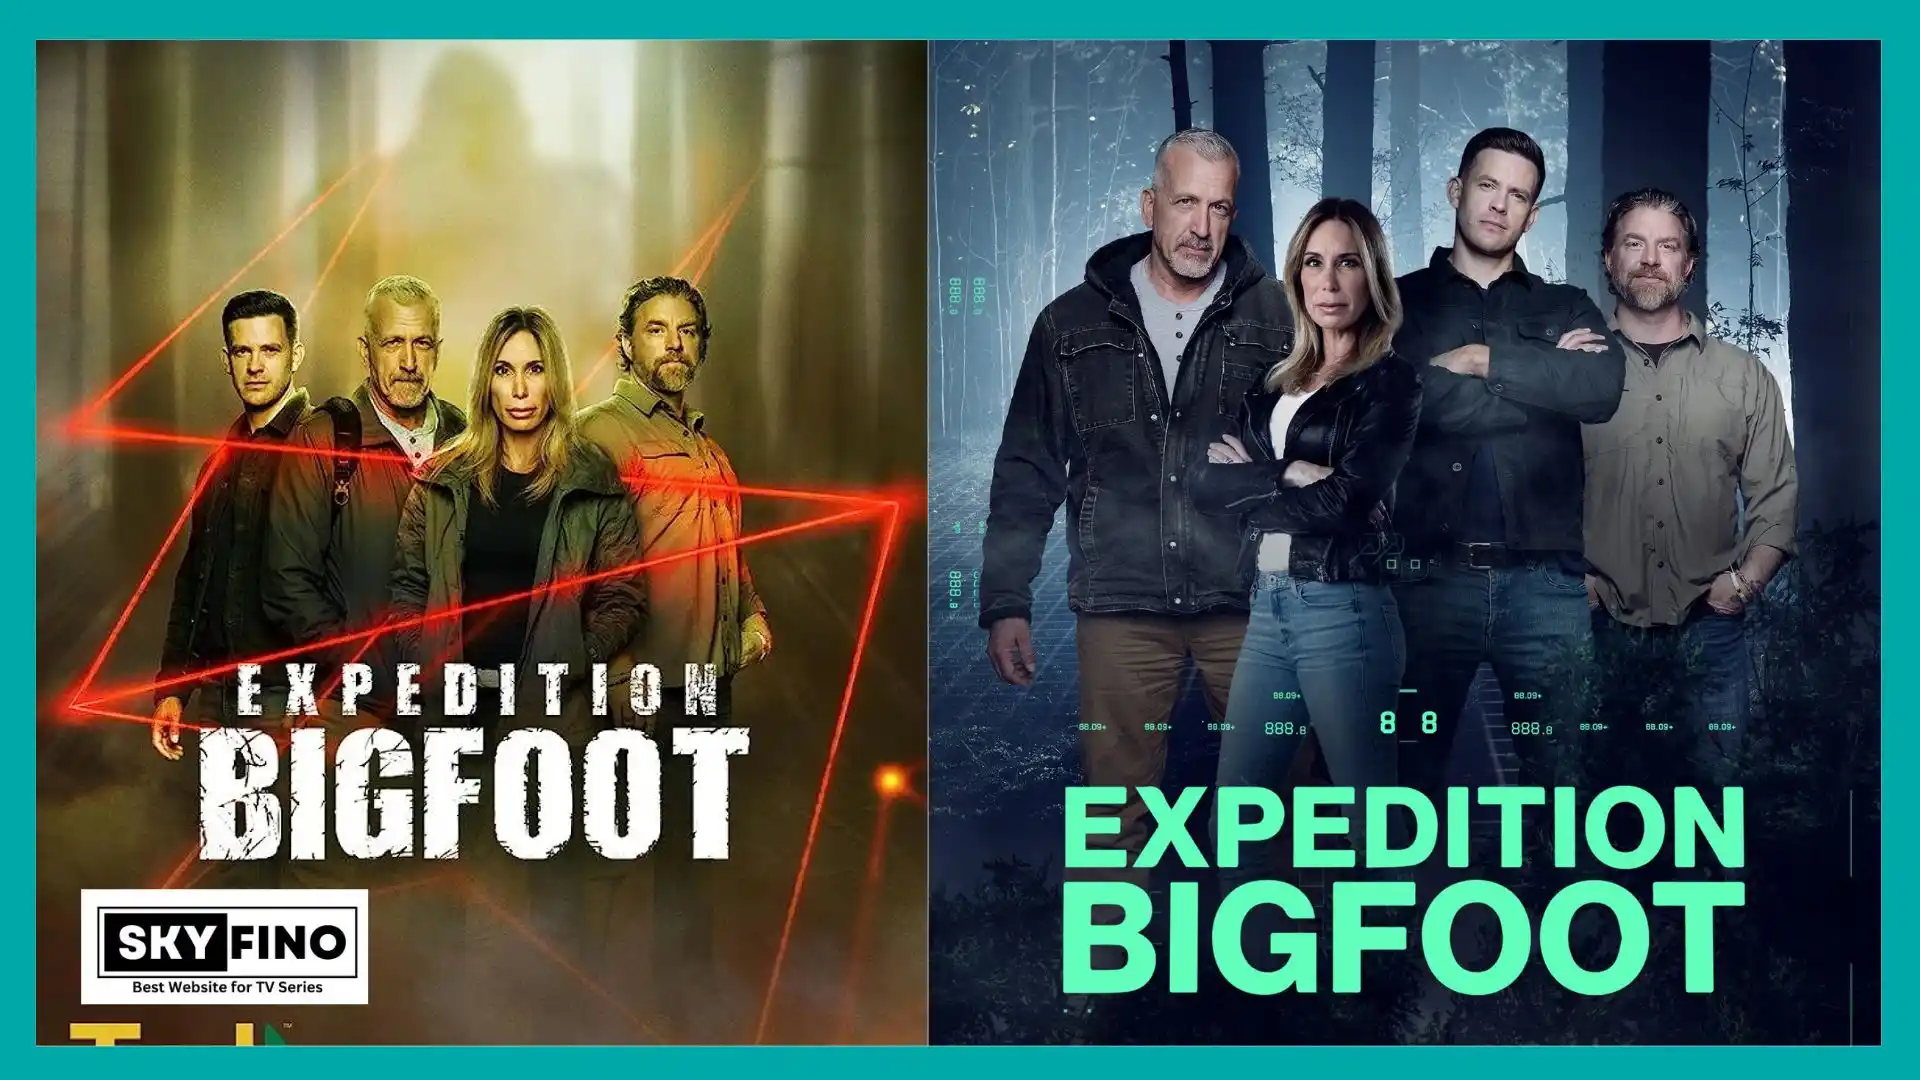 Expedition Bigfoot Season 4 Release Date, Schedule, Trailer and Cast